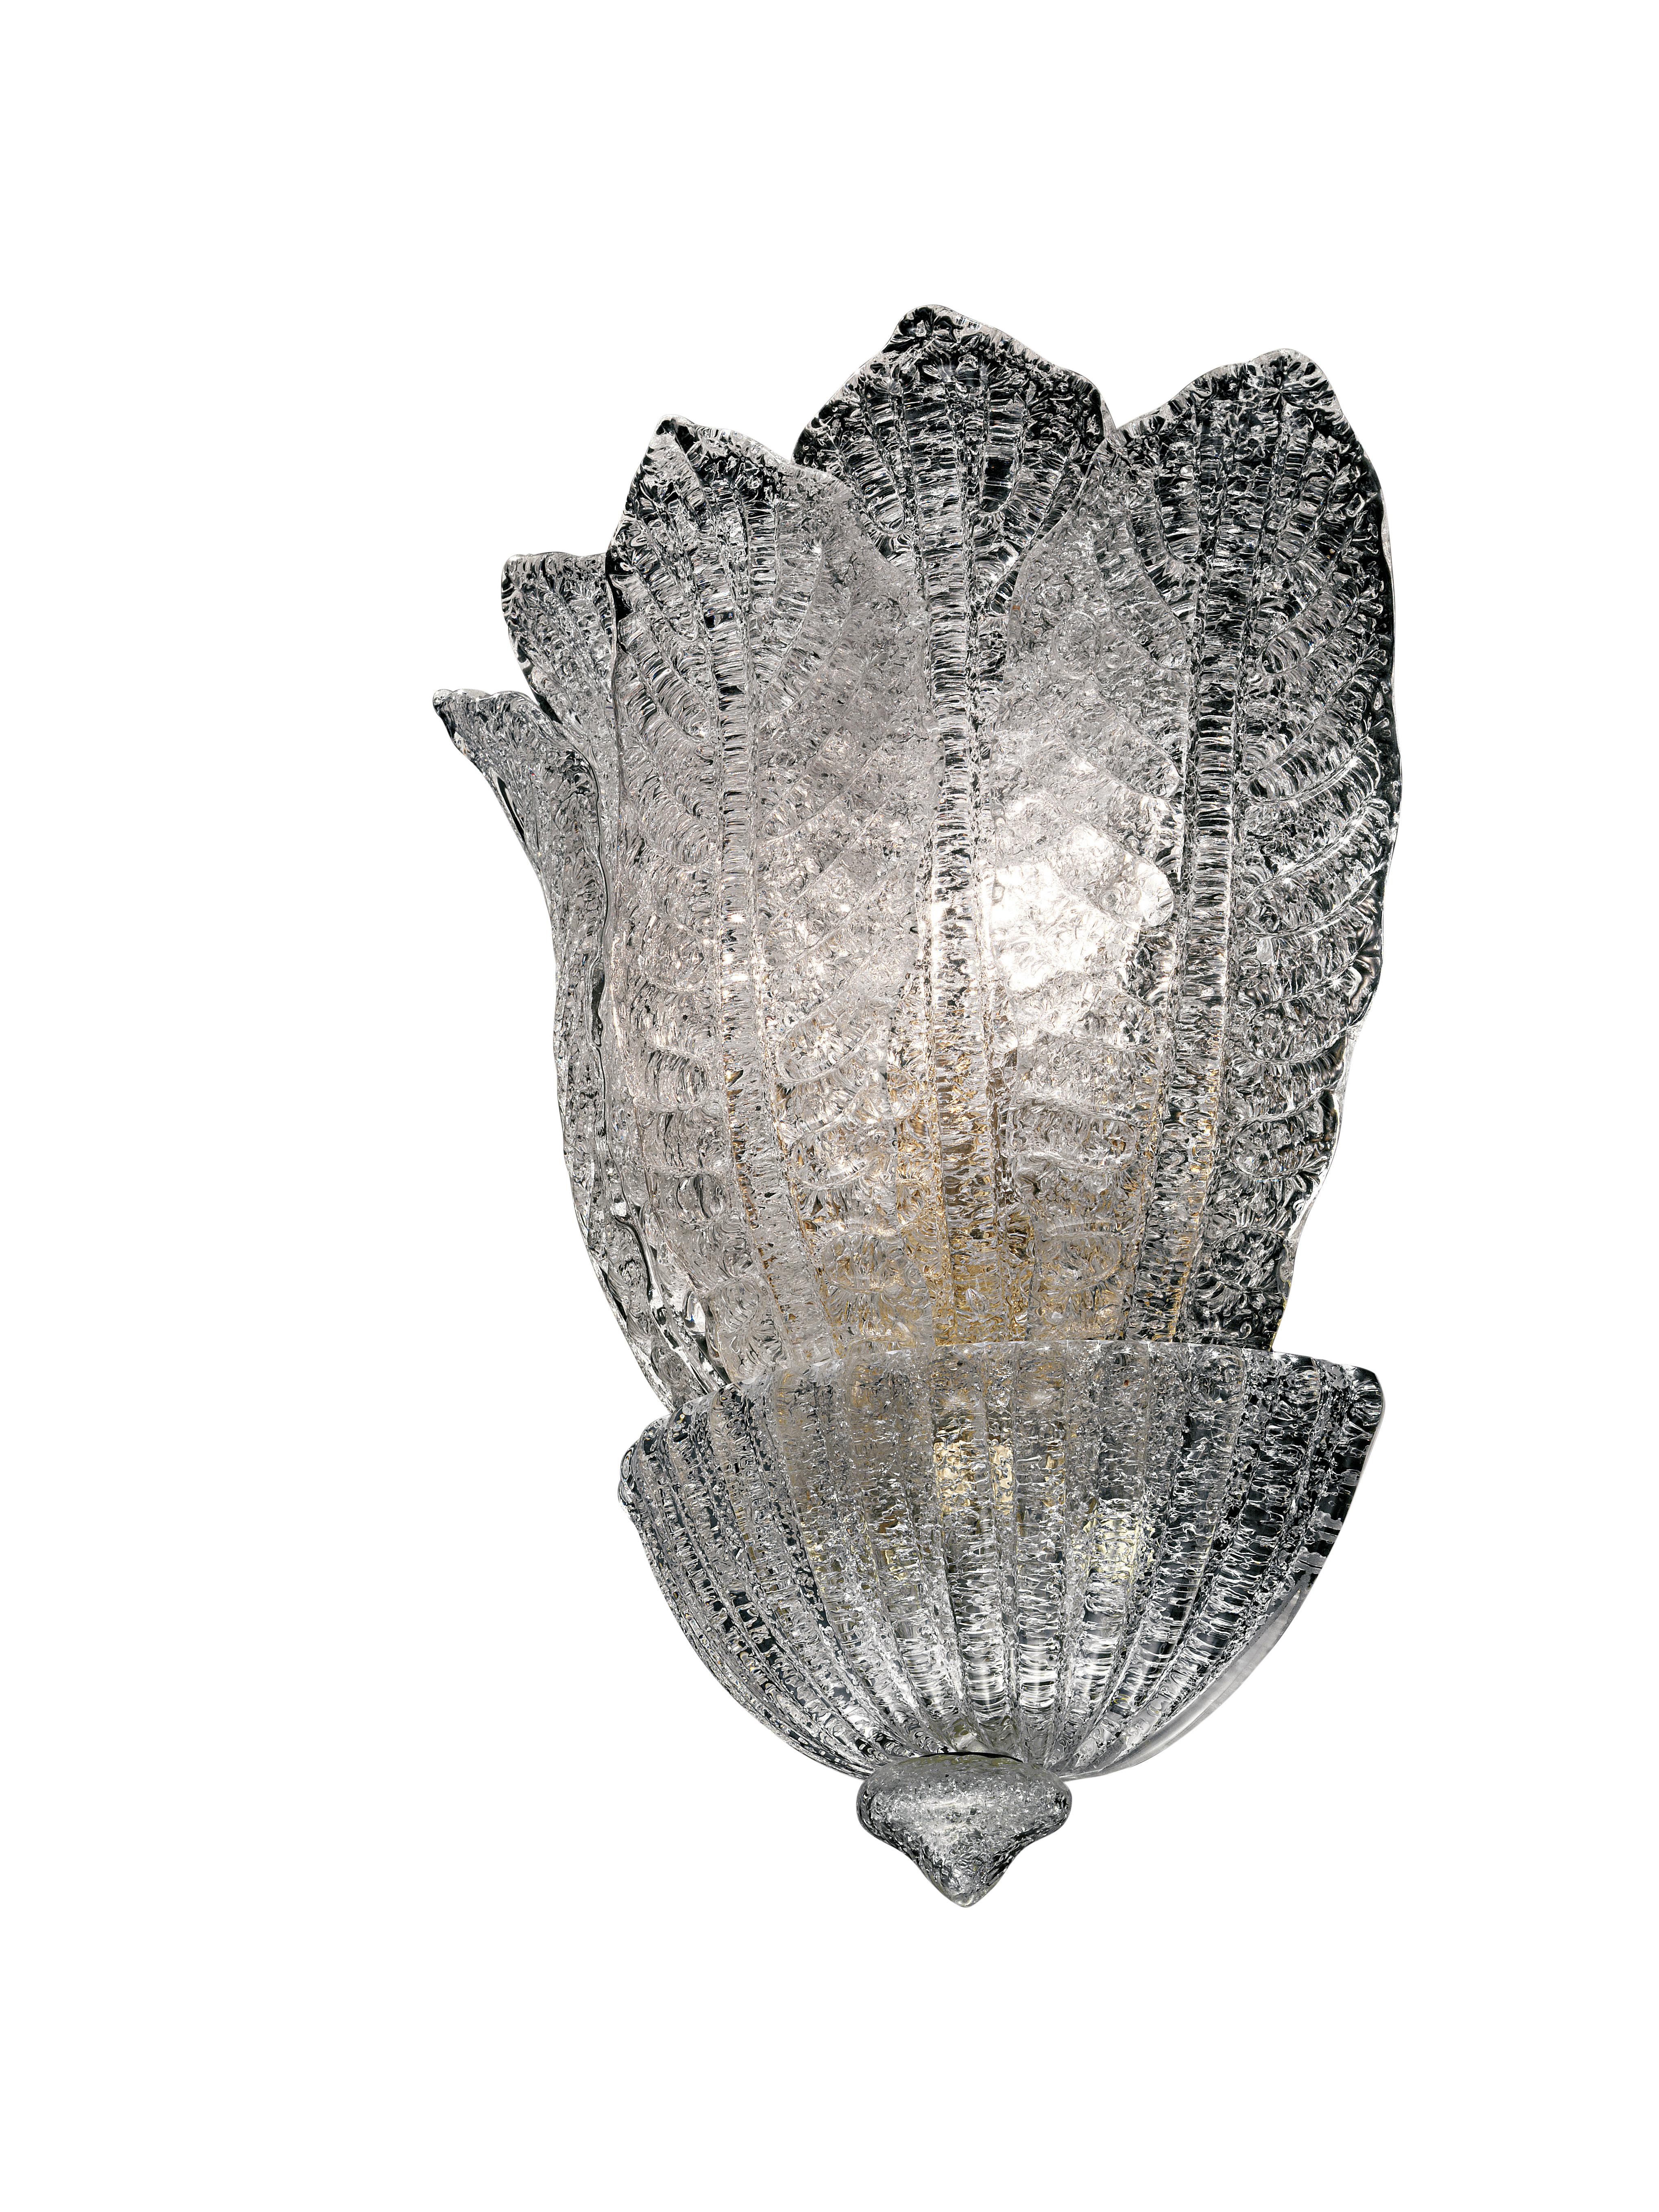 Clear (Crystal Rugiada_CR) Excelsior 5362 Wall Sconce in Glass with Galvanized Gold Finish, by Barovier 2